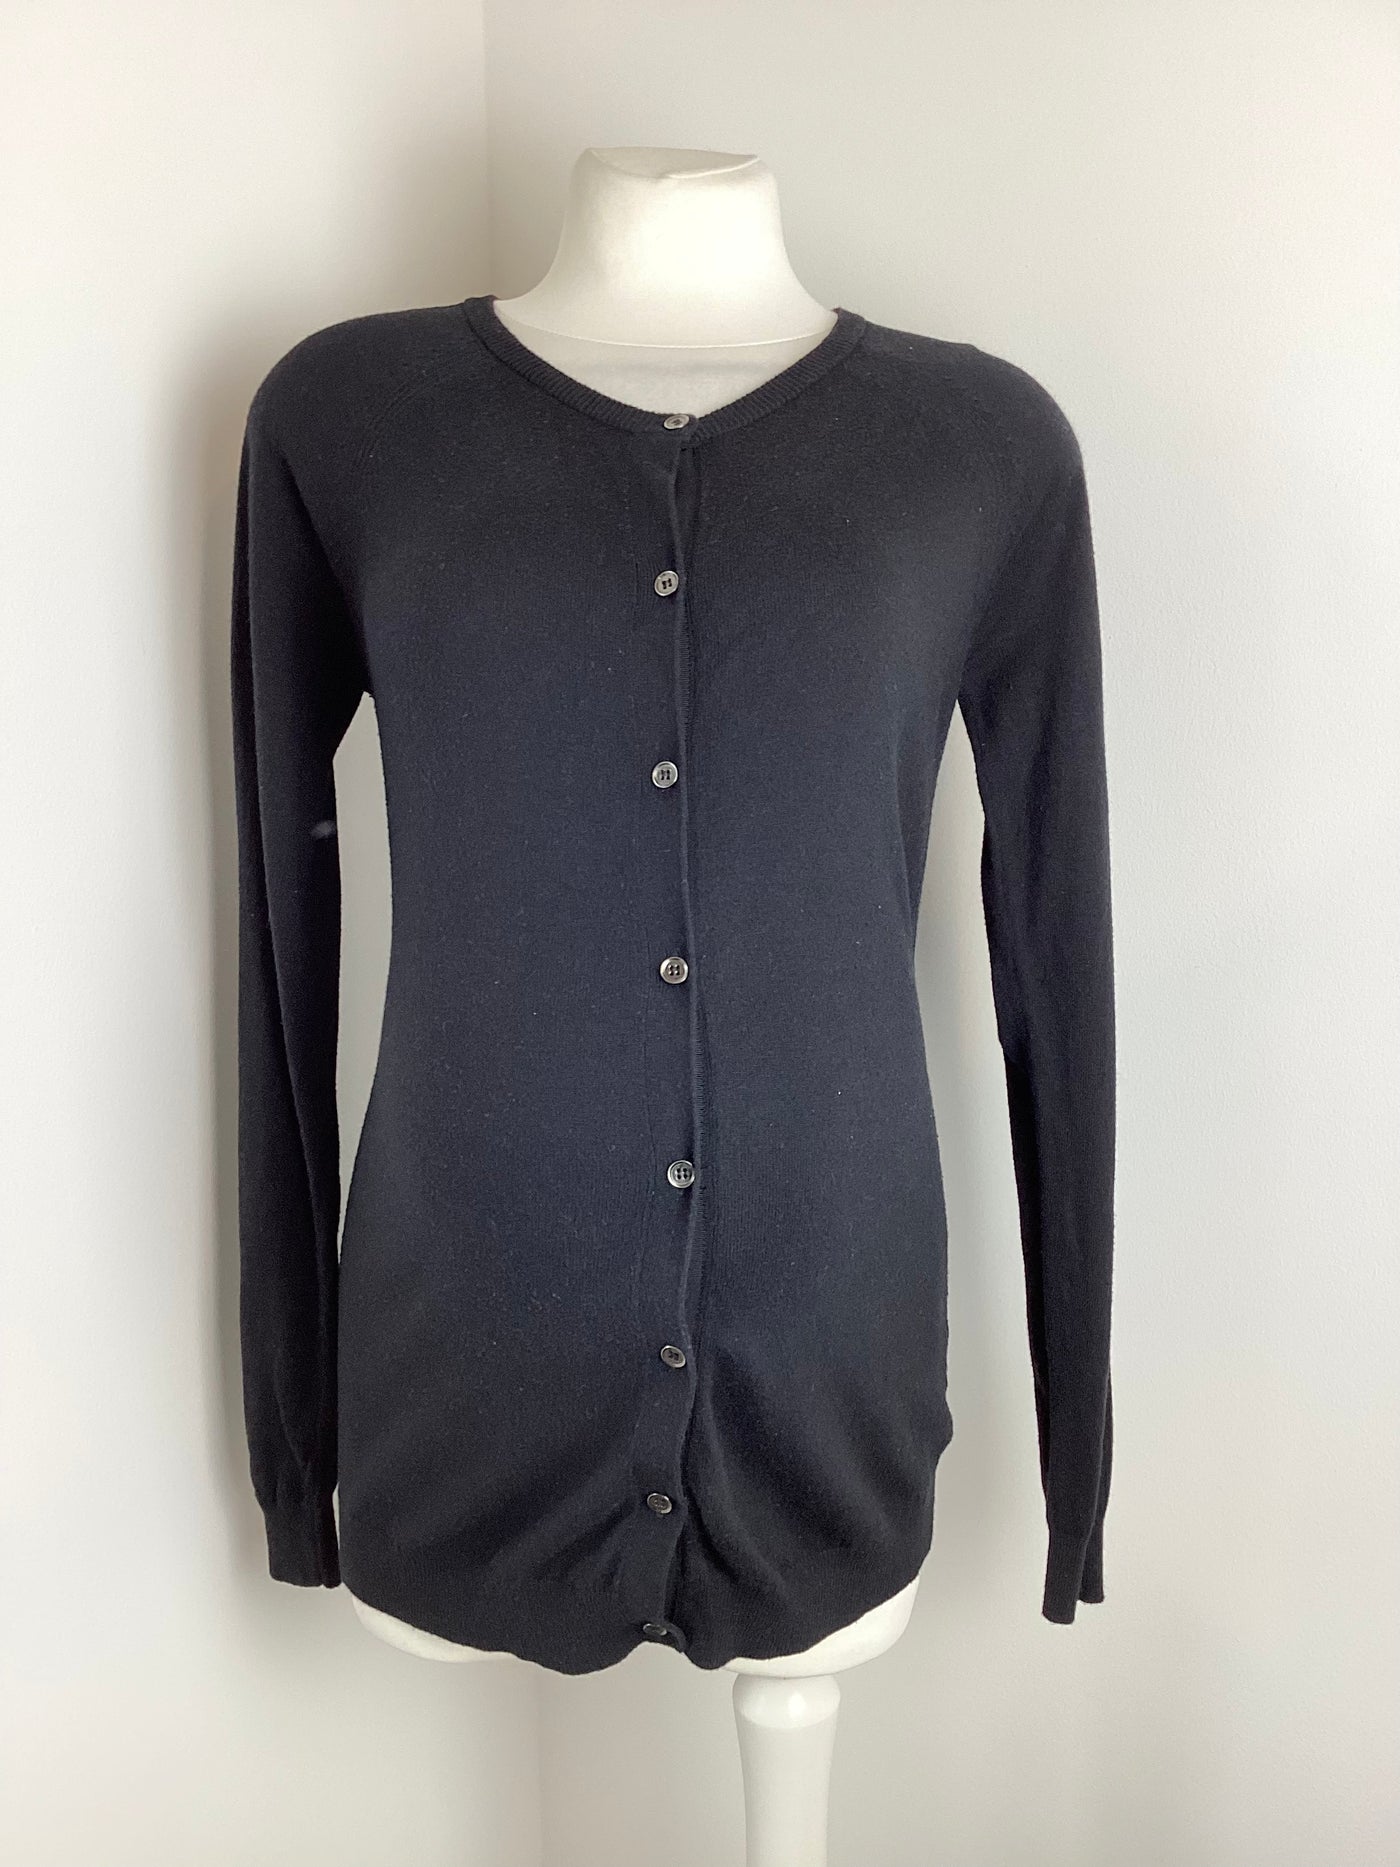 Next Maternity Black button front cardigan - Size 8